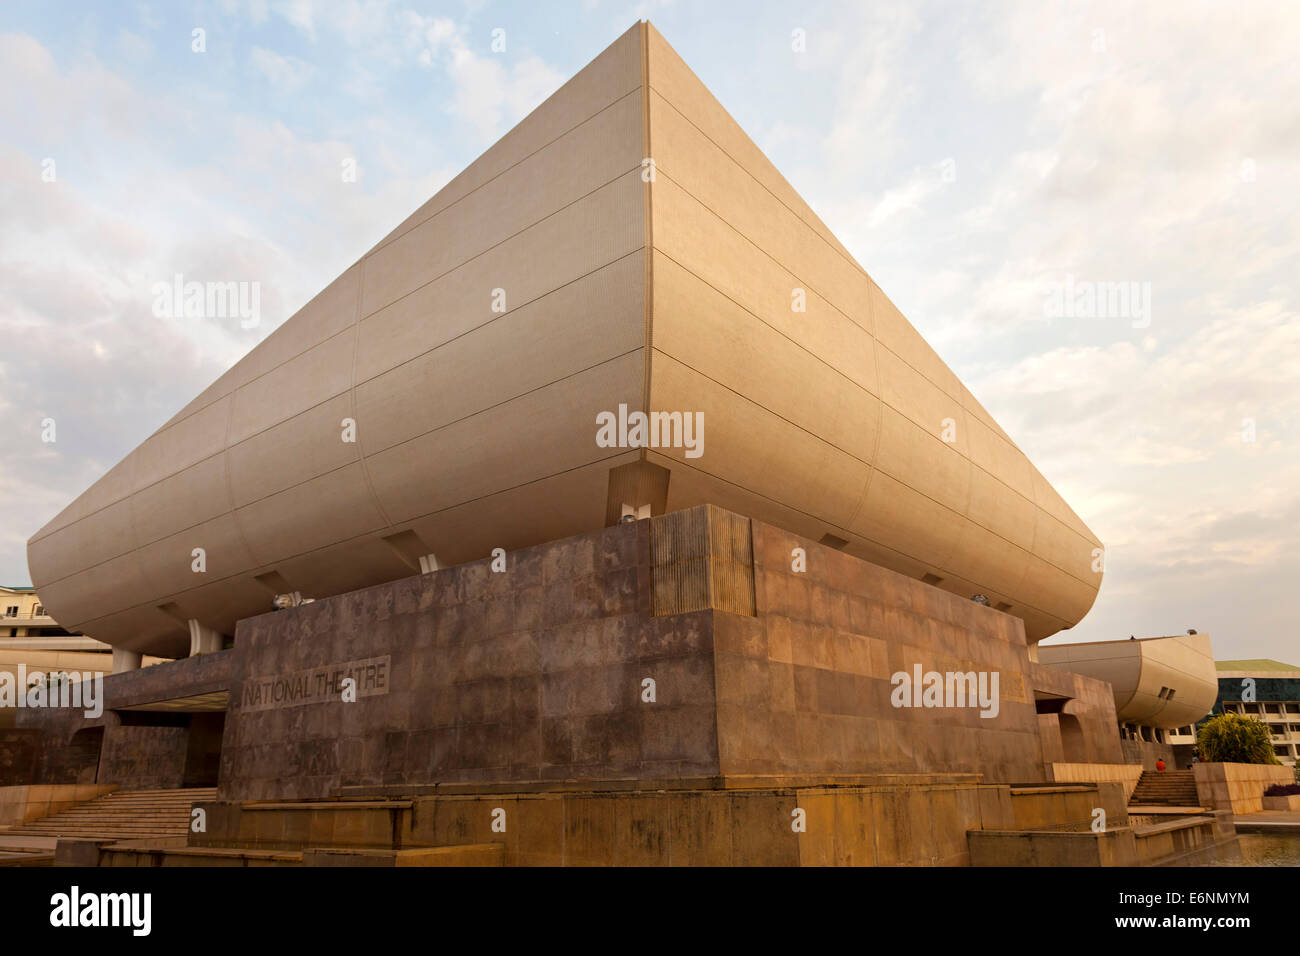 National Gallery, Accra, Ghana, Africa Stock Photo